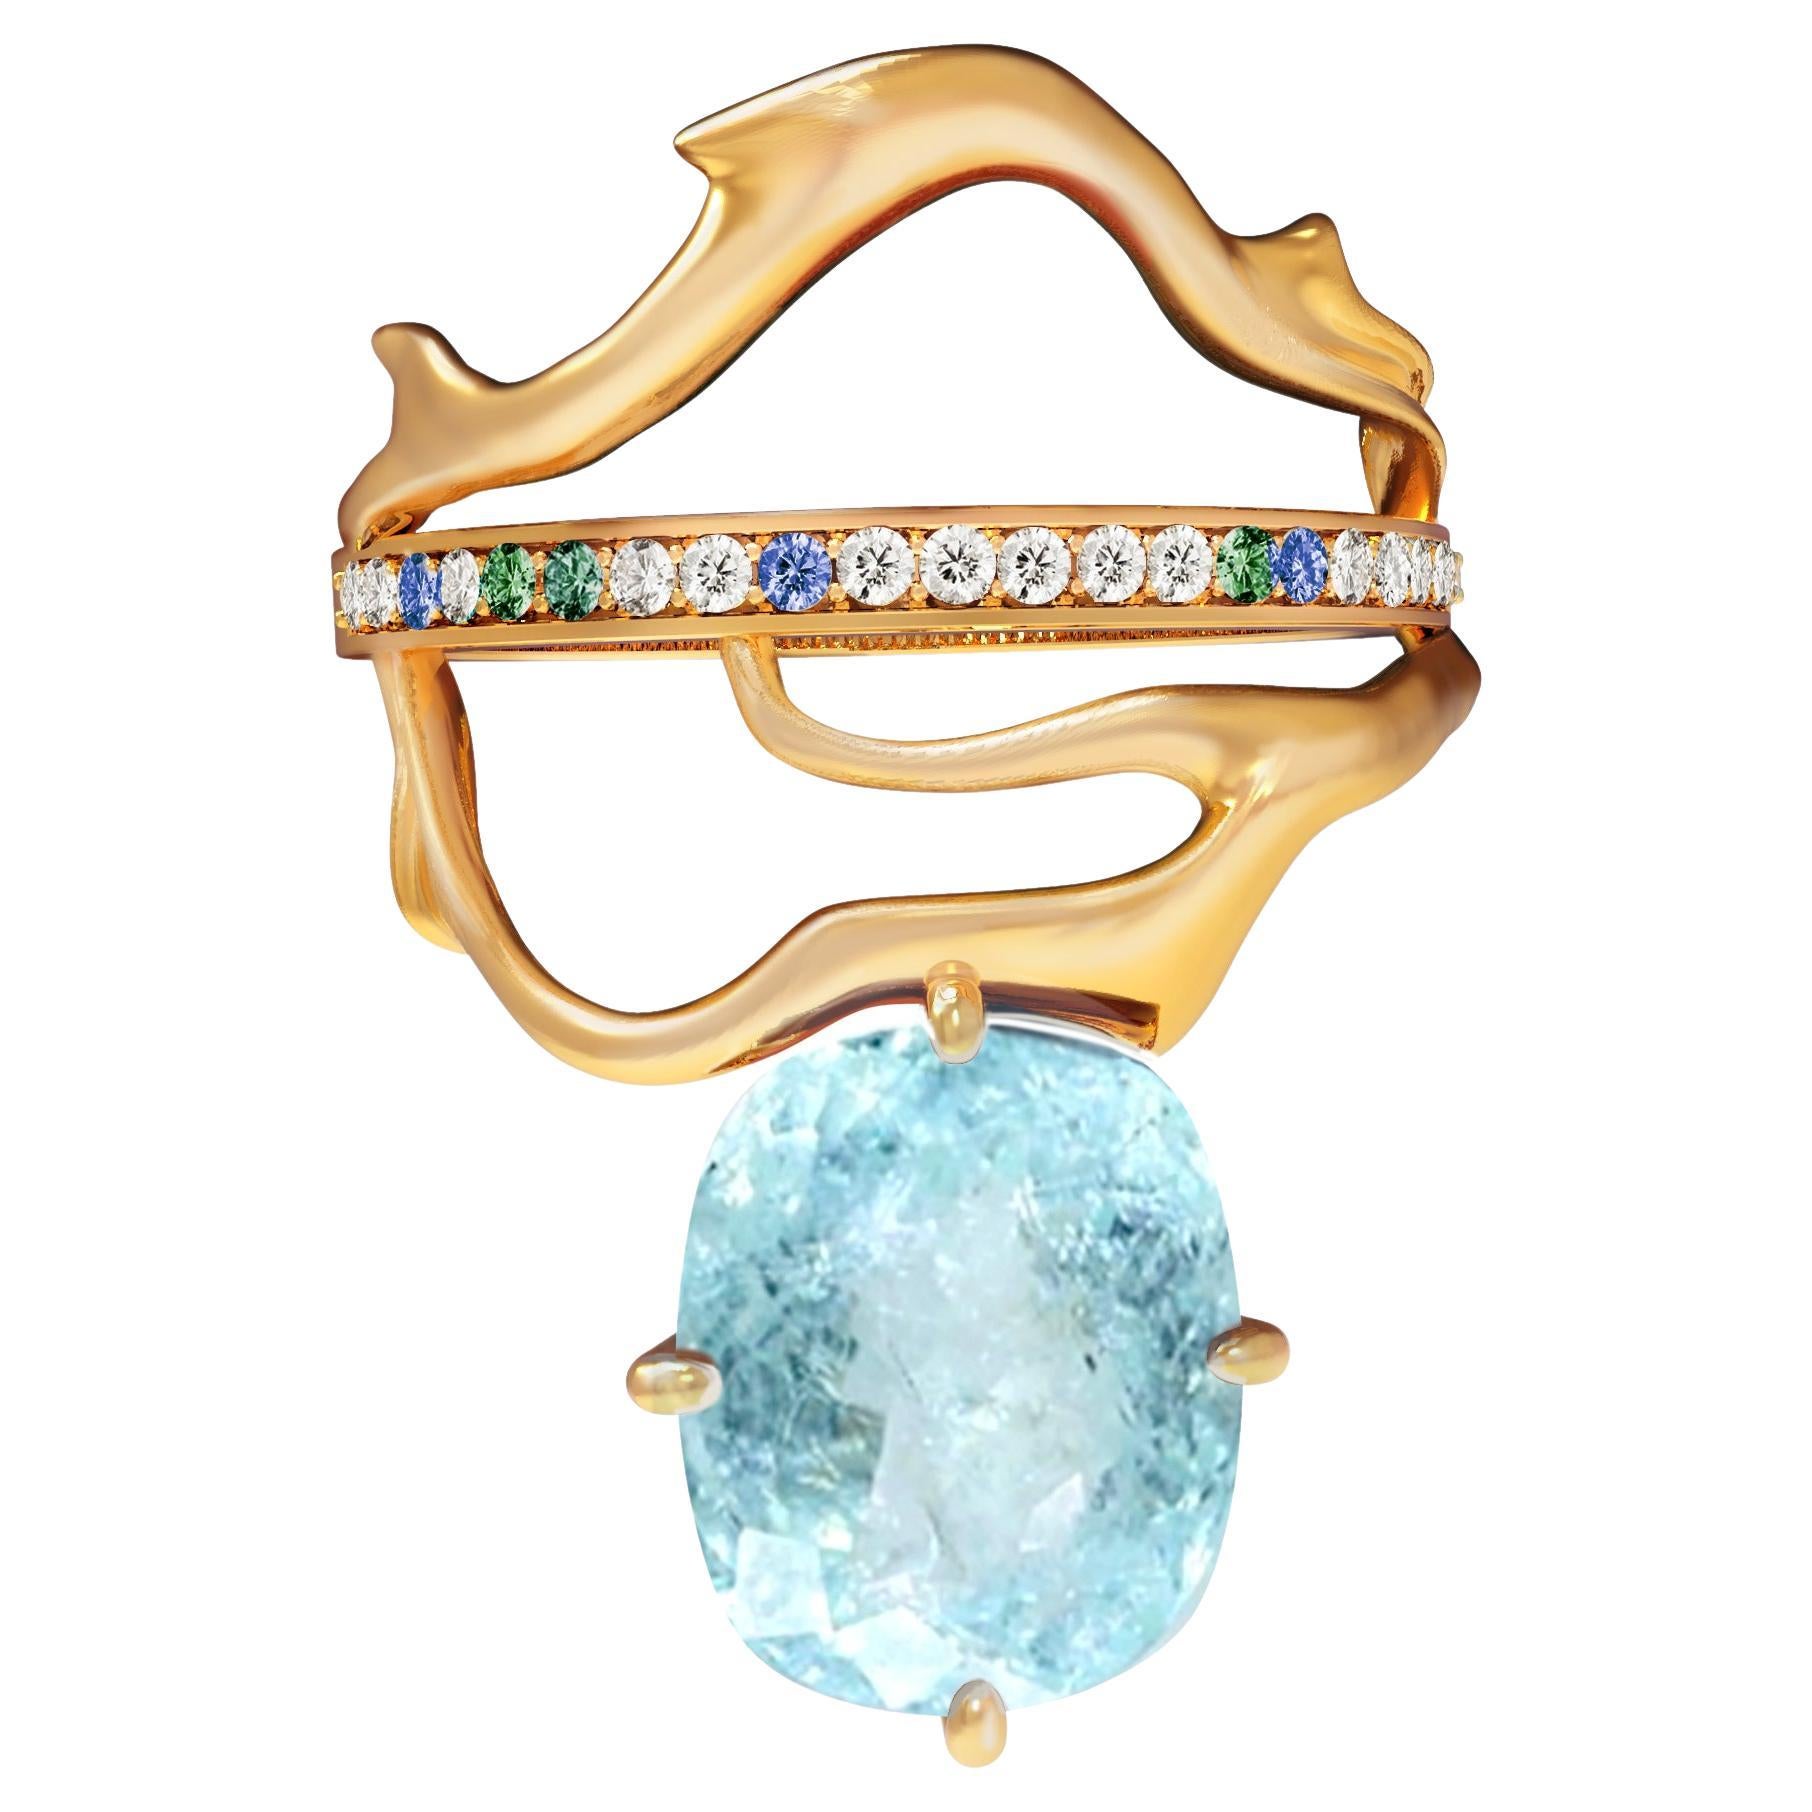 Ring with Paraiba Tourmaline, Diamonds and Sapphires in Yellow Gold